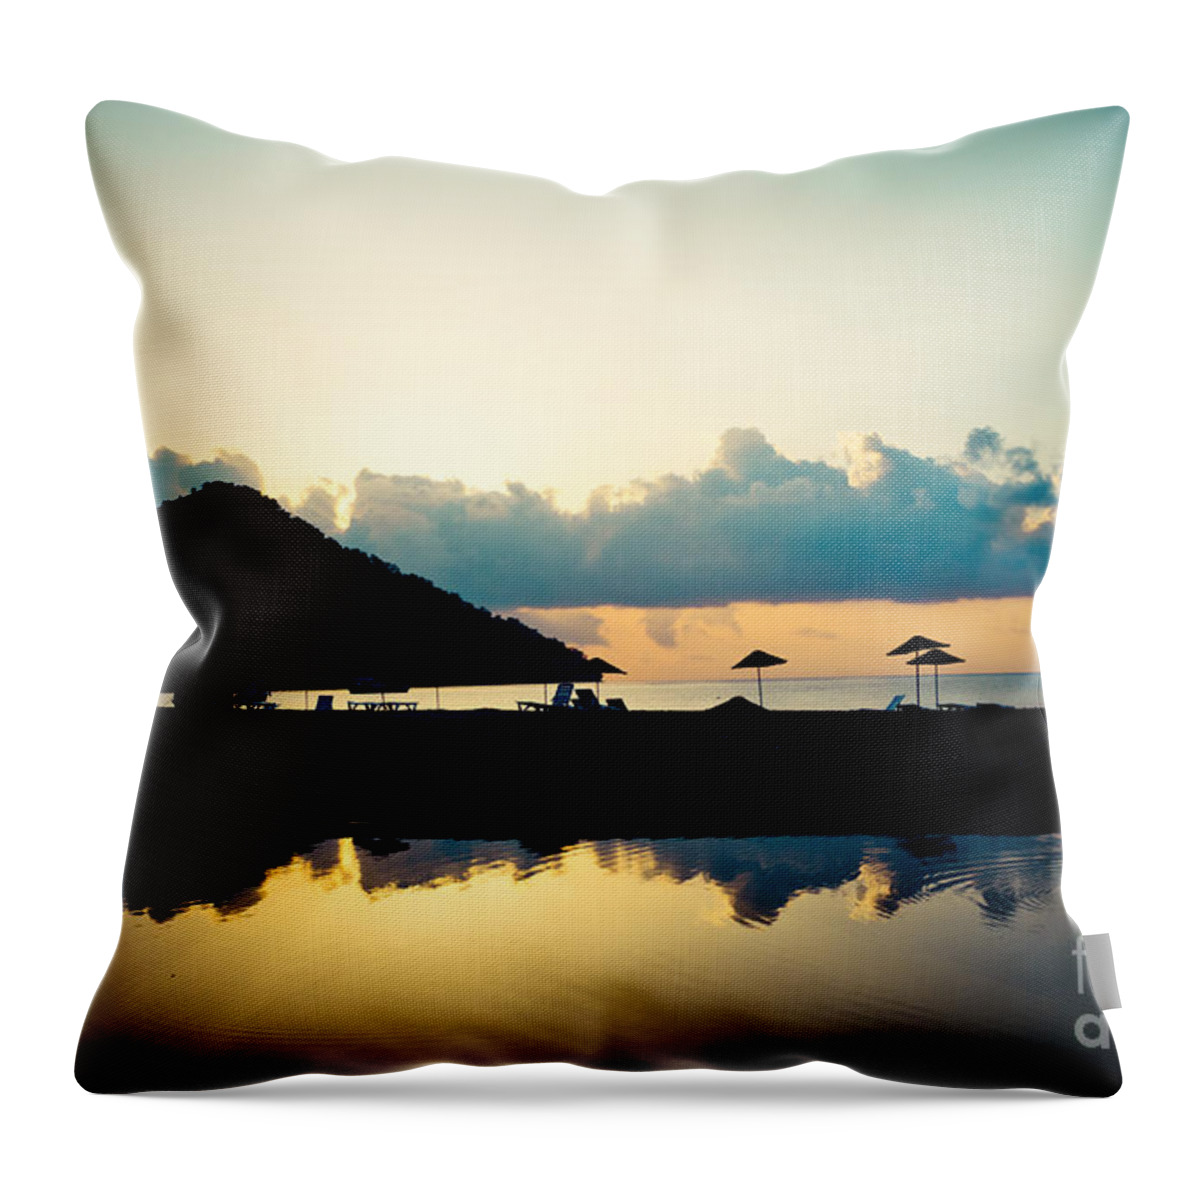 Water Throw Pillow featuring the photograph Seascape Sunrise Sea And Clouds by Raimond Klavins